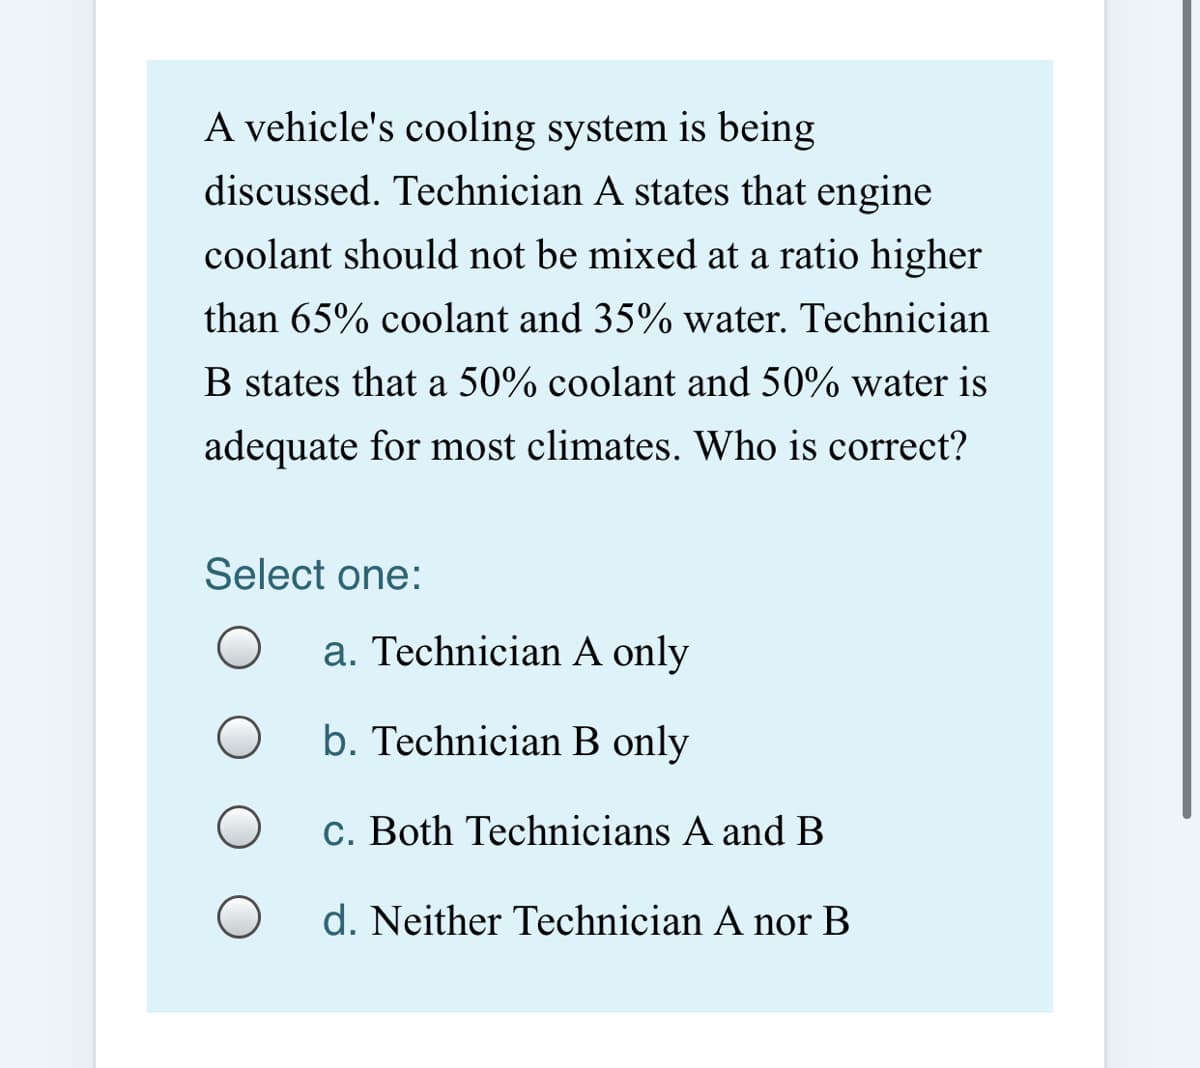 A vehicle's cooling system is being
discussed. Technician A states that engine
coolant should not be mixed at a ratio higher
than 65% coolant and 35% water. Technician
B states that a 50% coolant and 50% water is
adequate for most climates. Who is correct?
Select one:
a. Technician A only
b. Technician B only
c. Both Technicians A and B
d. Neither Technician A nor B
